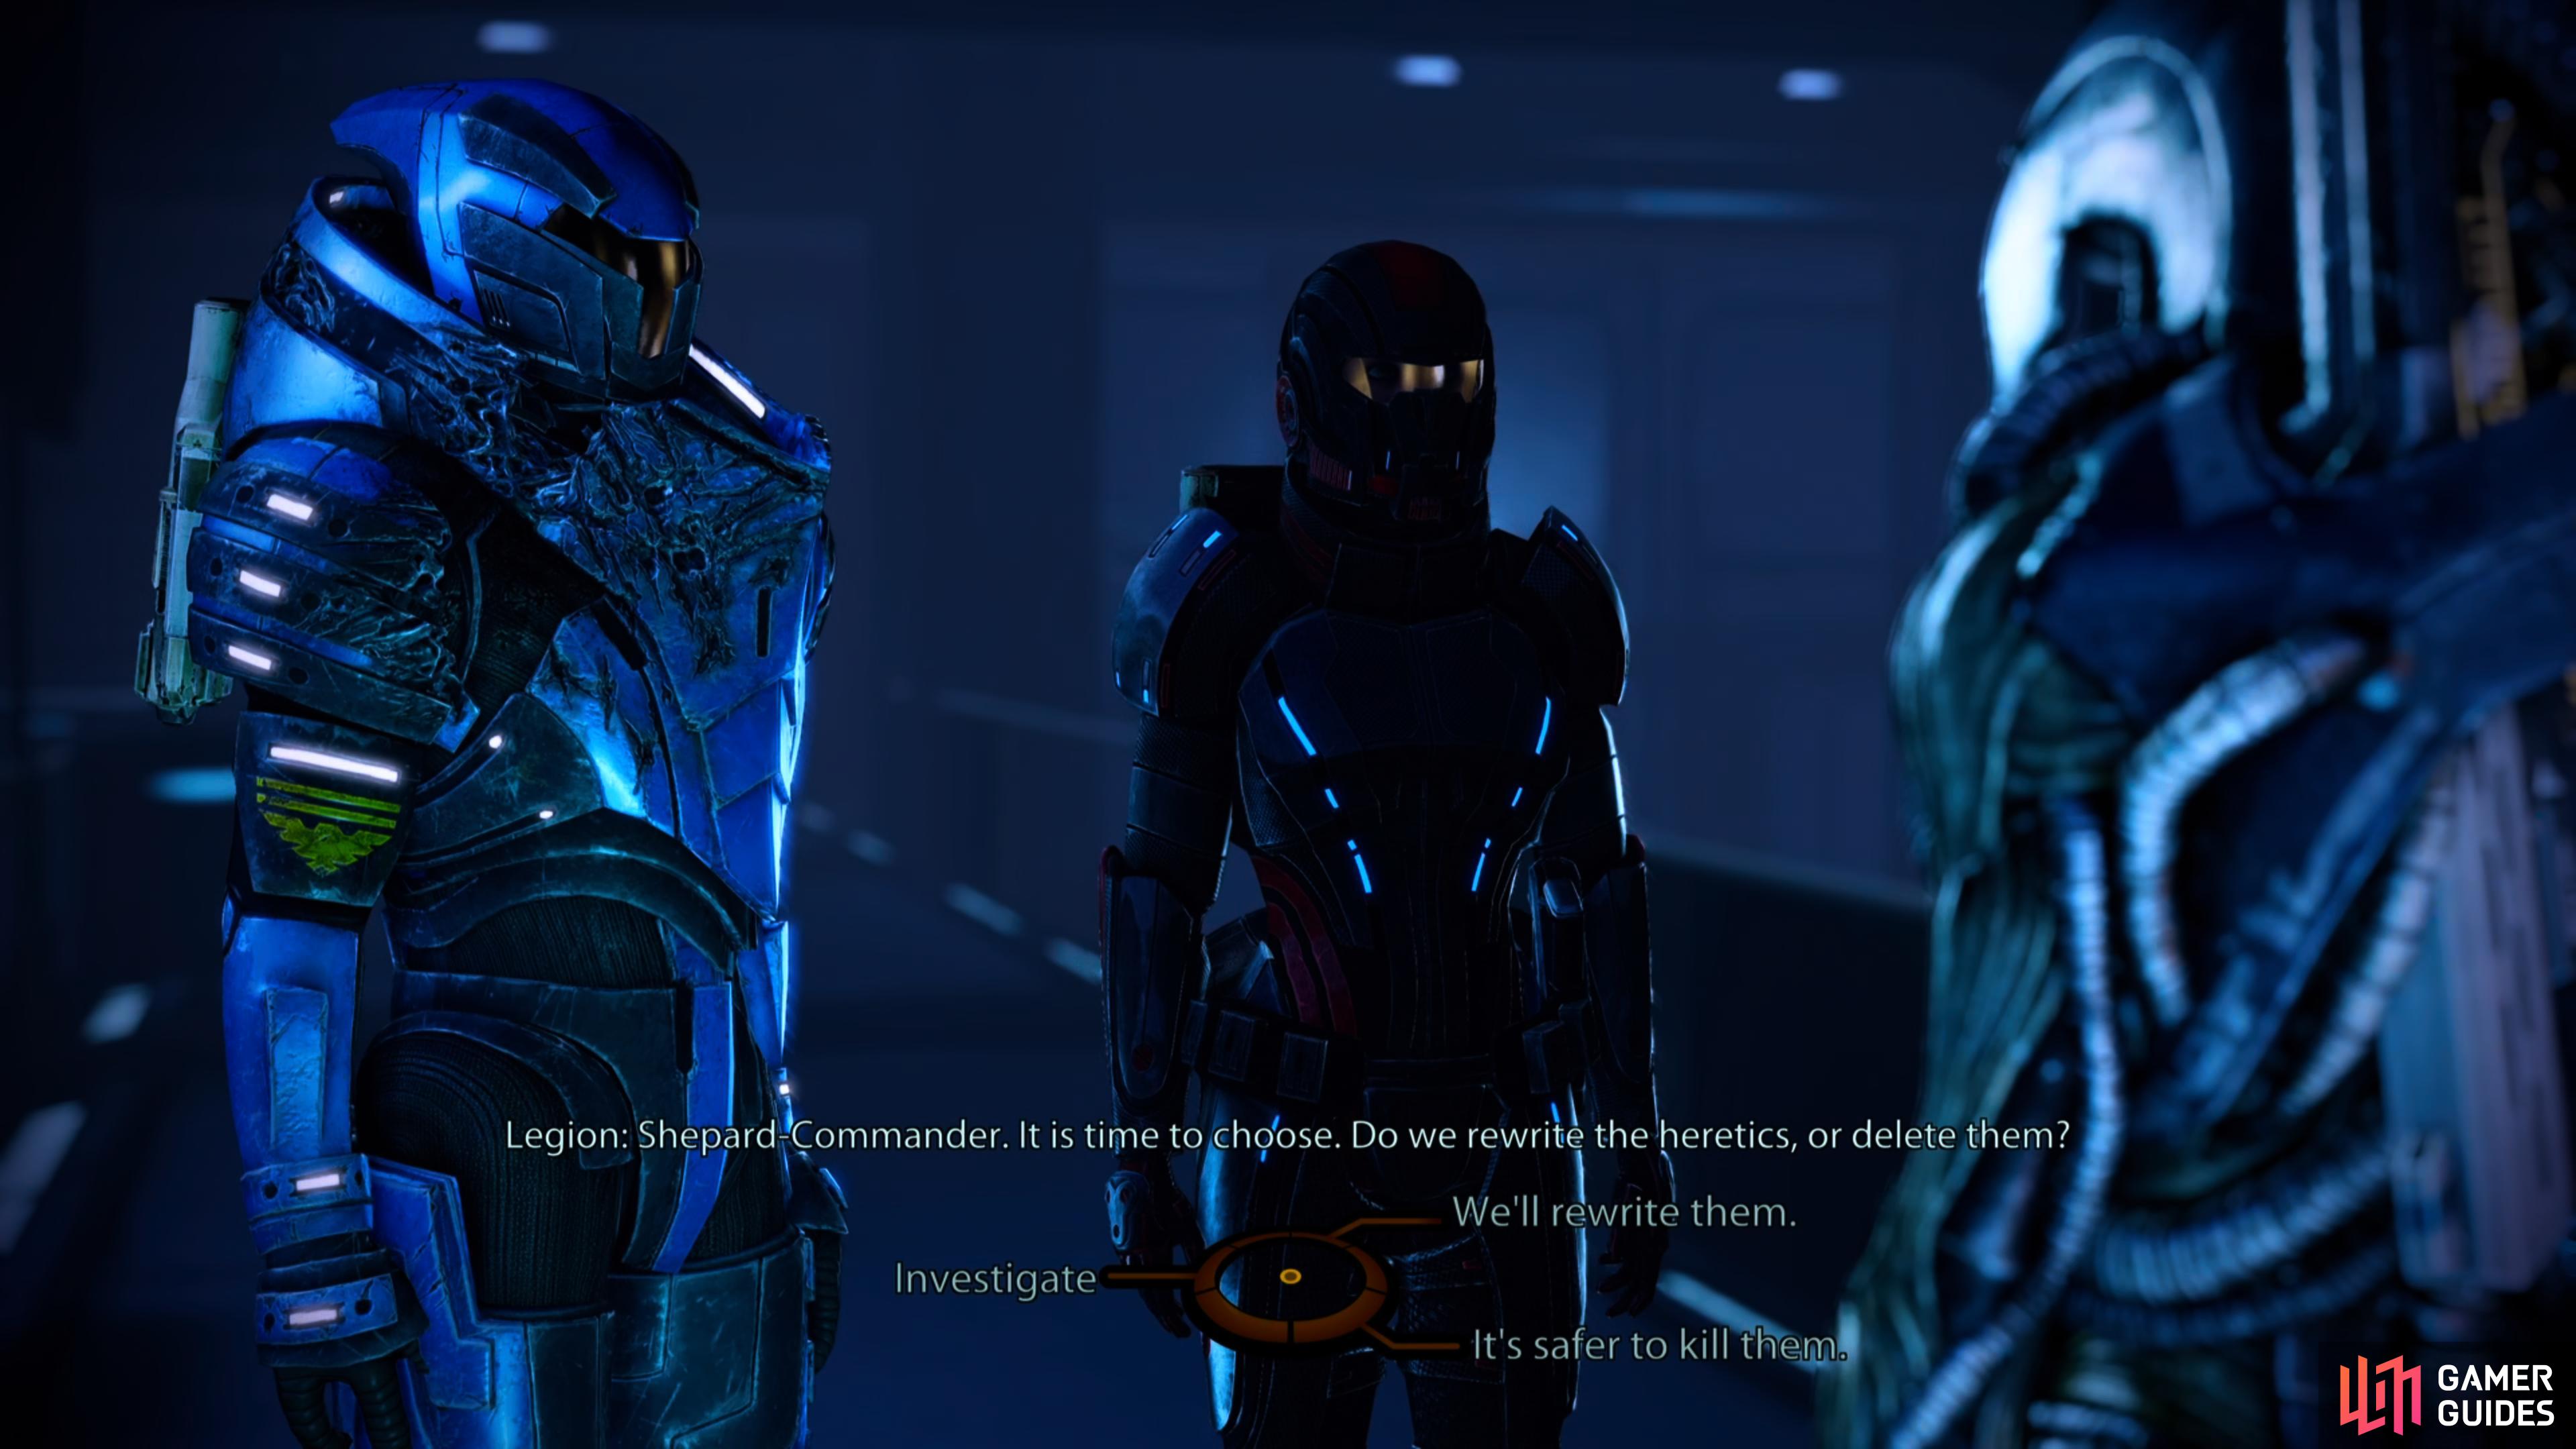 Survive the geth assault and you'll be presented with a choice - destroy or overwrite the heretics.